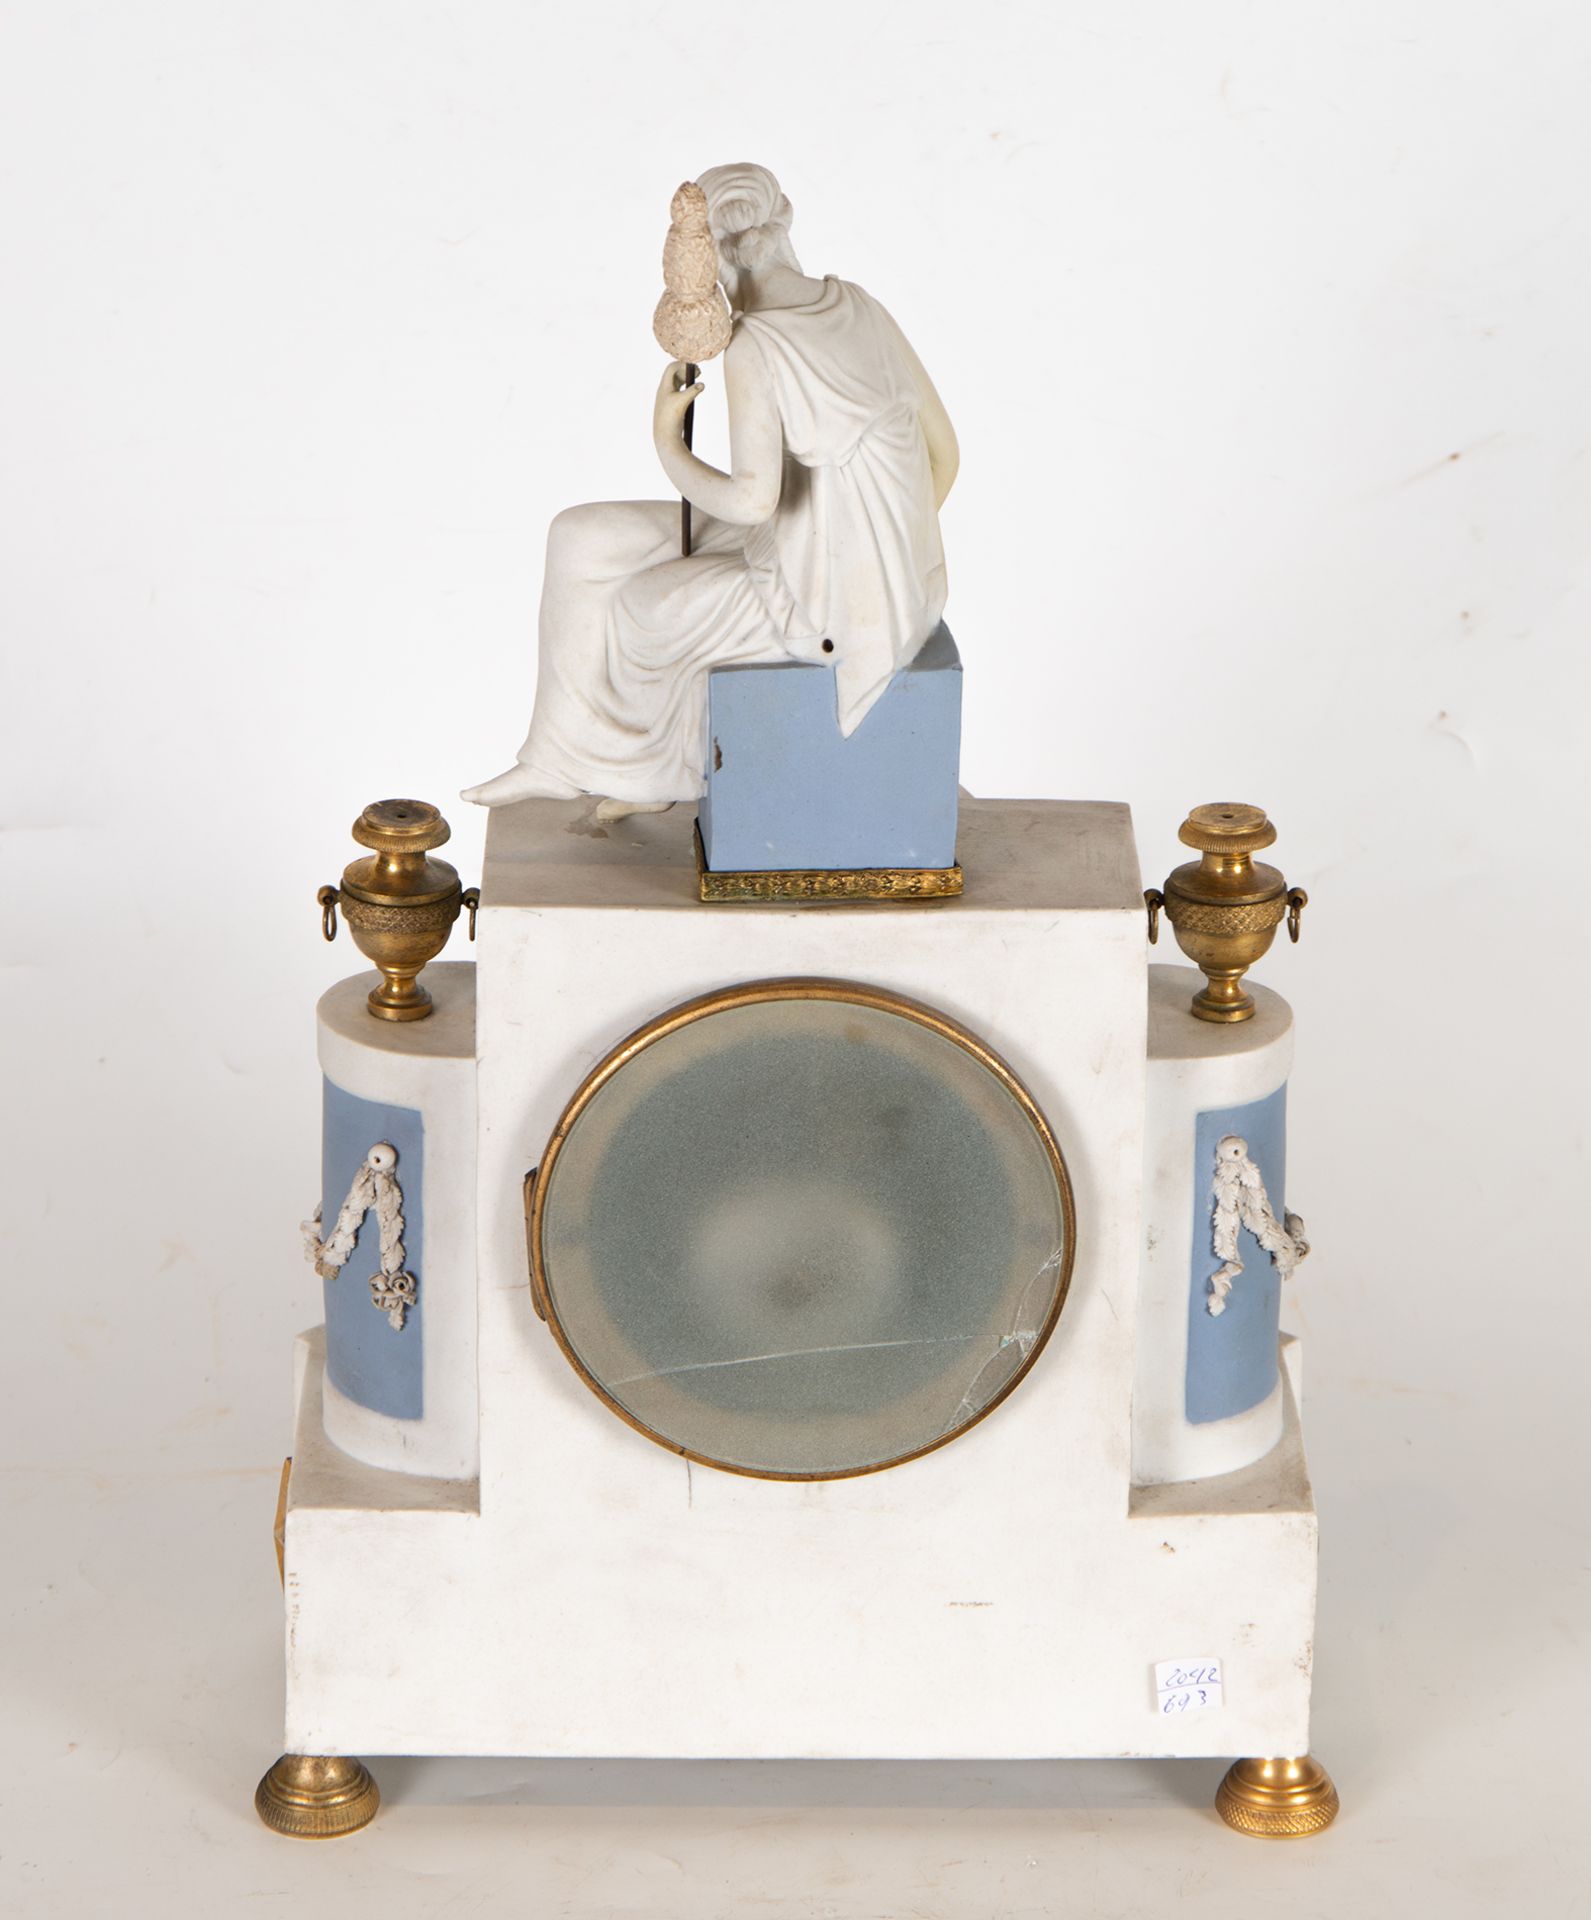 Empire Style Clock in Wedgwood porcelain and gilt bronze, 19th century French school - Image 11 of 11